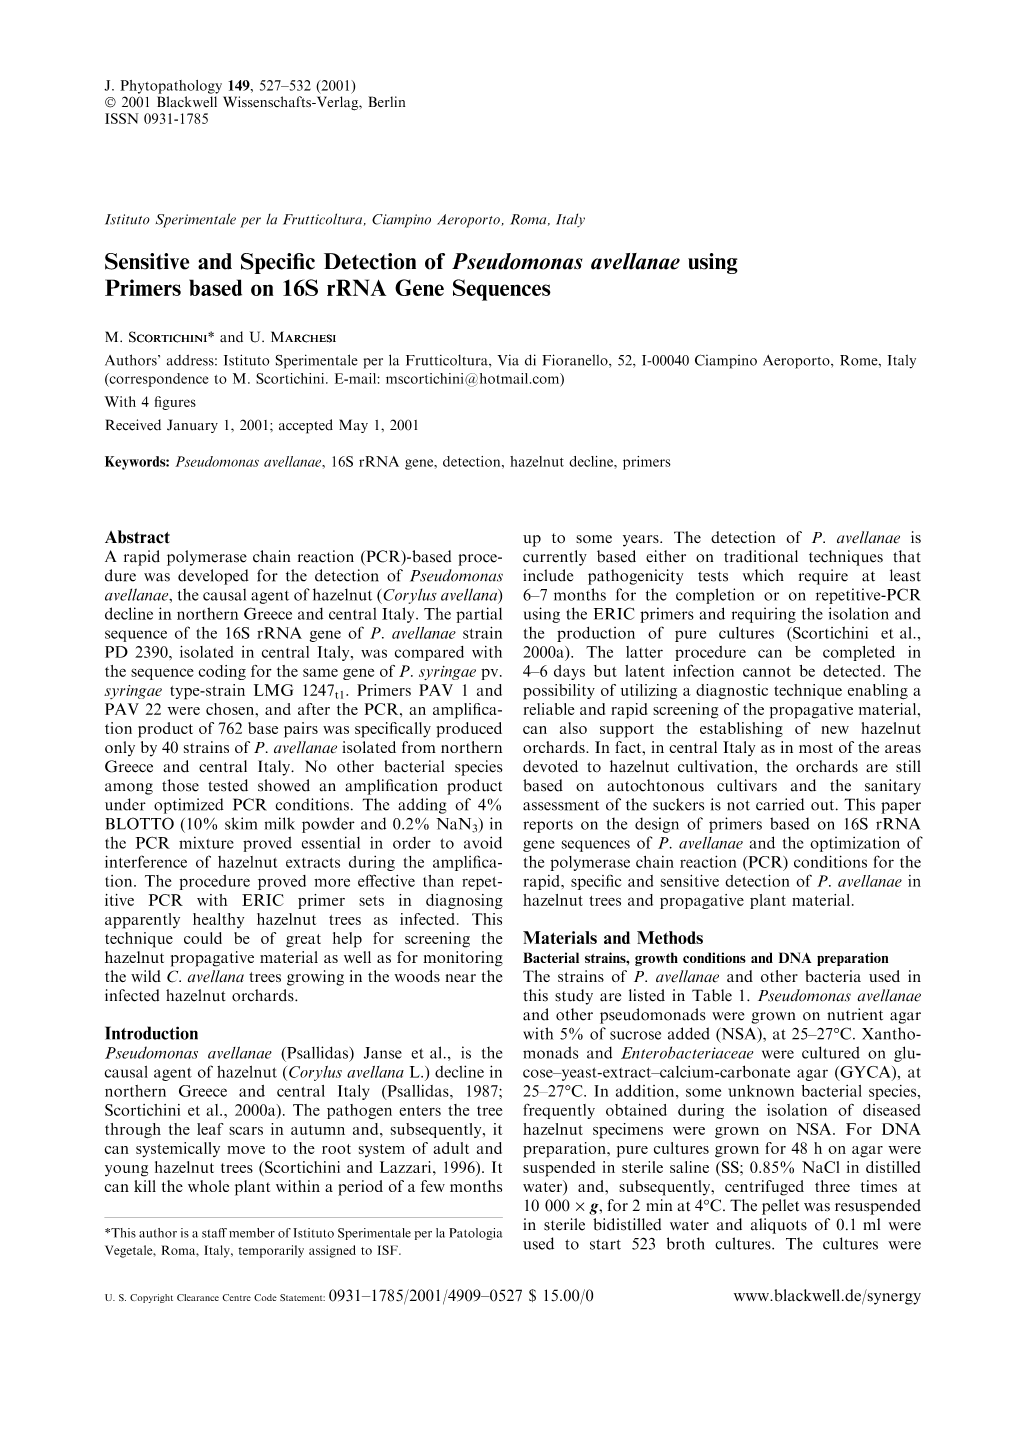 Sensitive and Specific Detection of Pseudomonas Avellanae Using